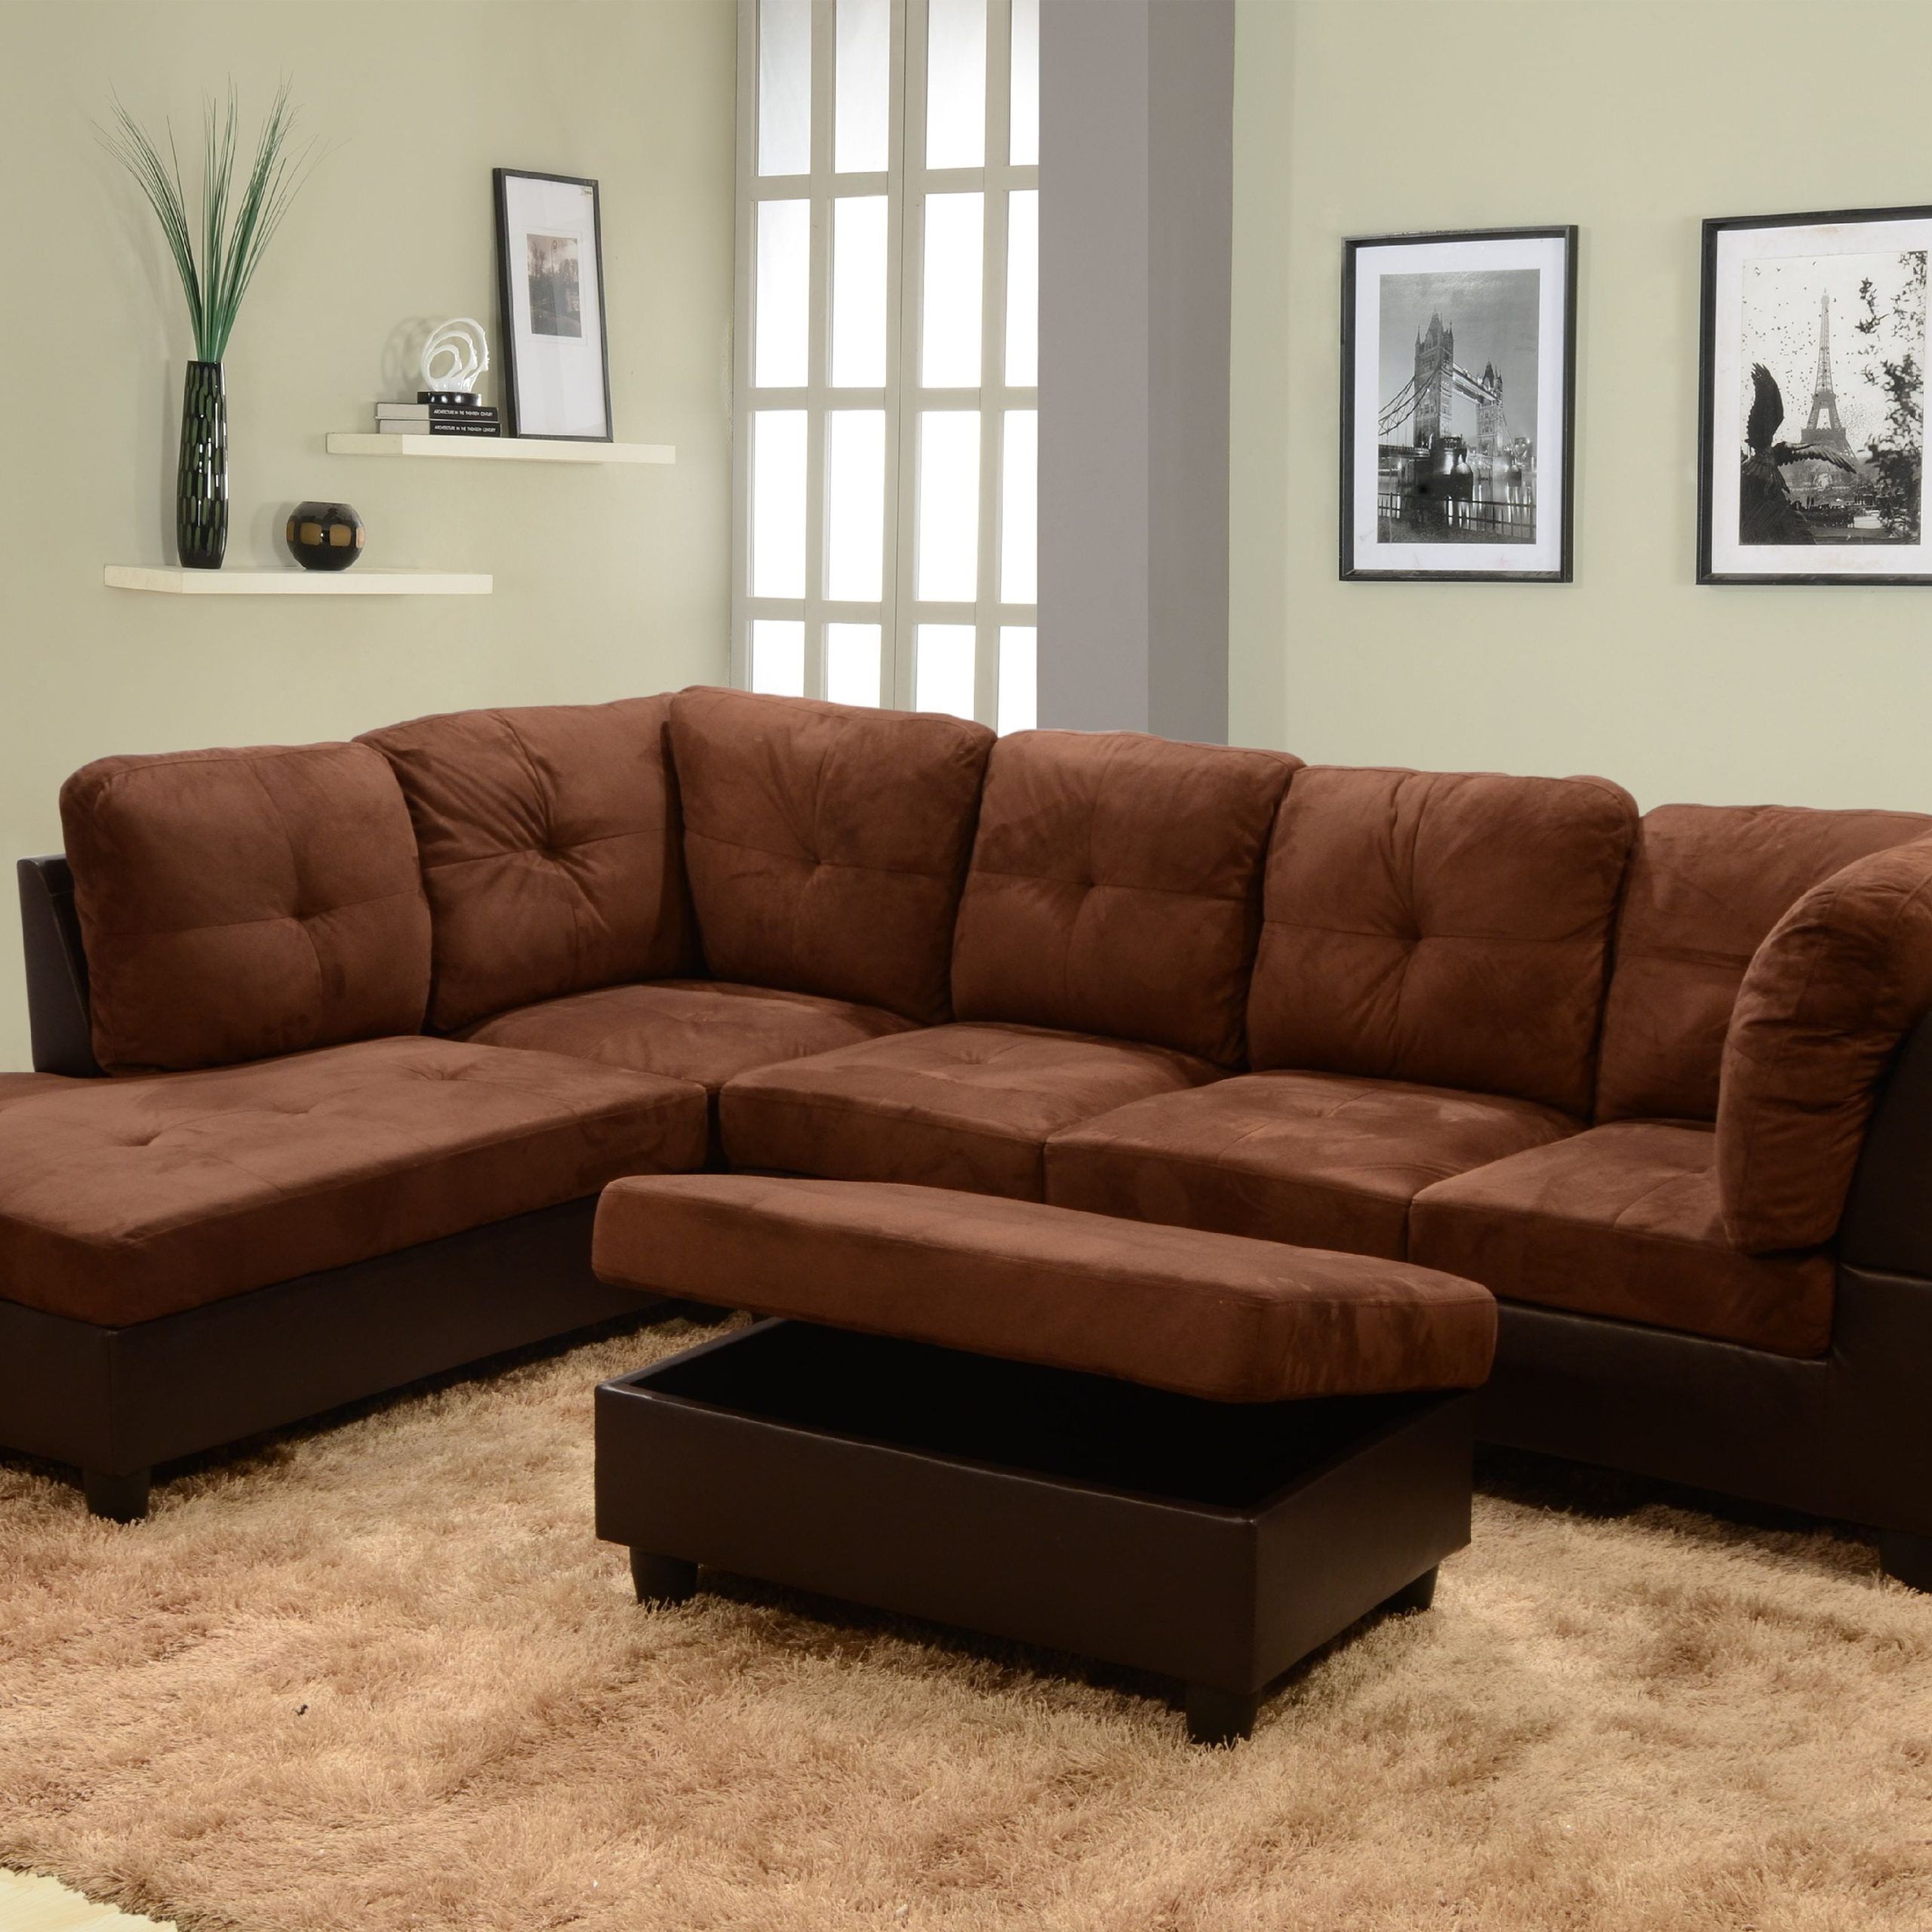 Matt Right Facing Sectional Sofa With Ottoman,chocolate – Walmart Within Best And Newest Sofas With Ottomans (View 3 of 15)